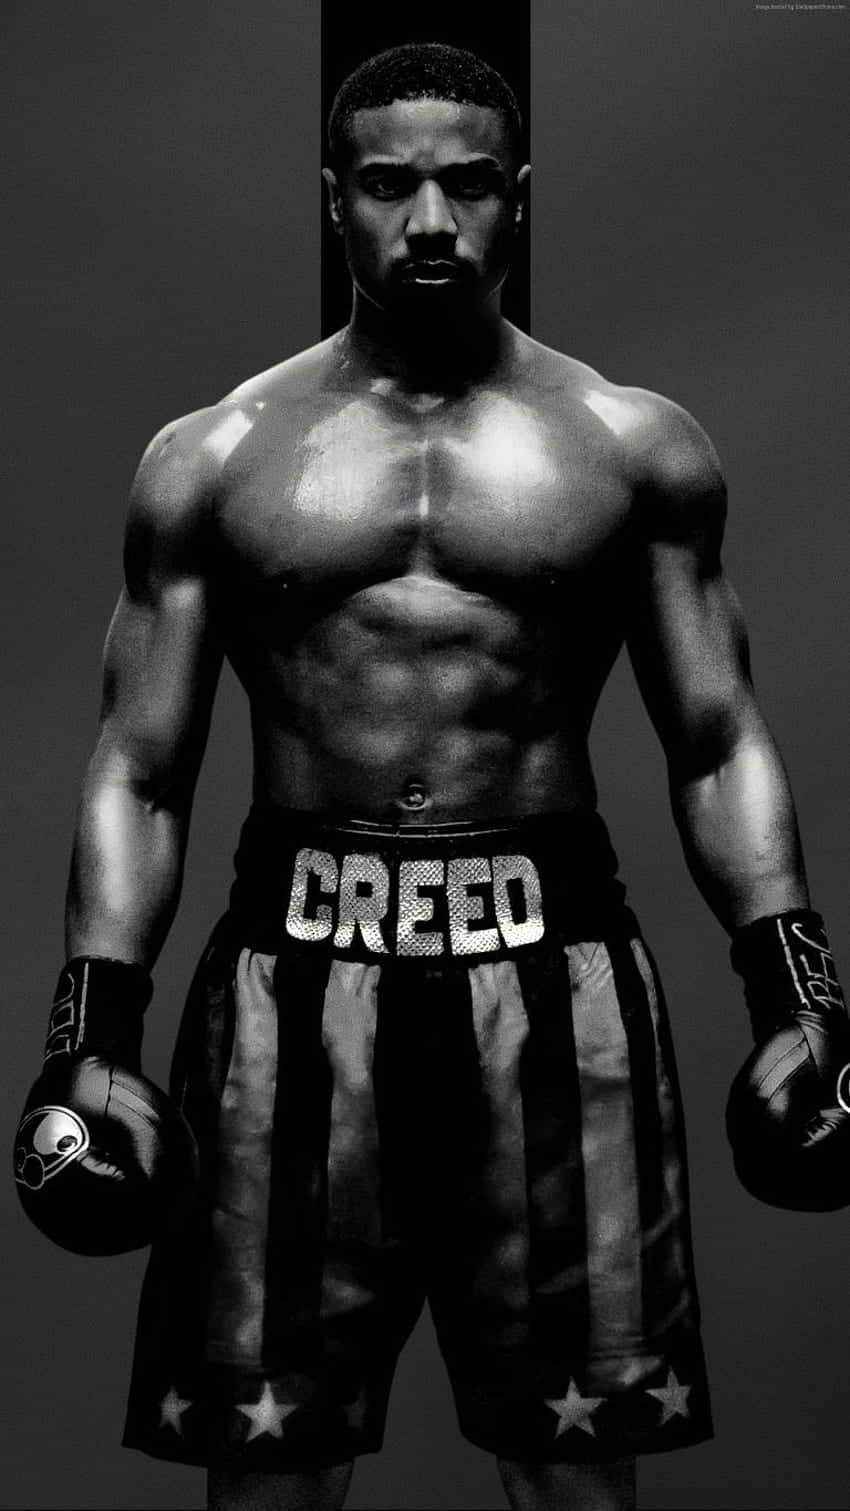 Boxer Creed Movie Promotional Photo Wallpaper